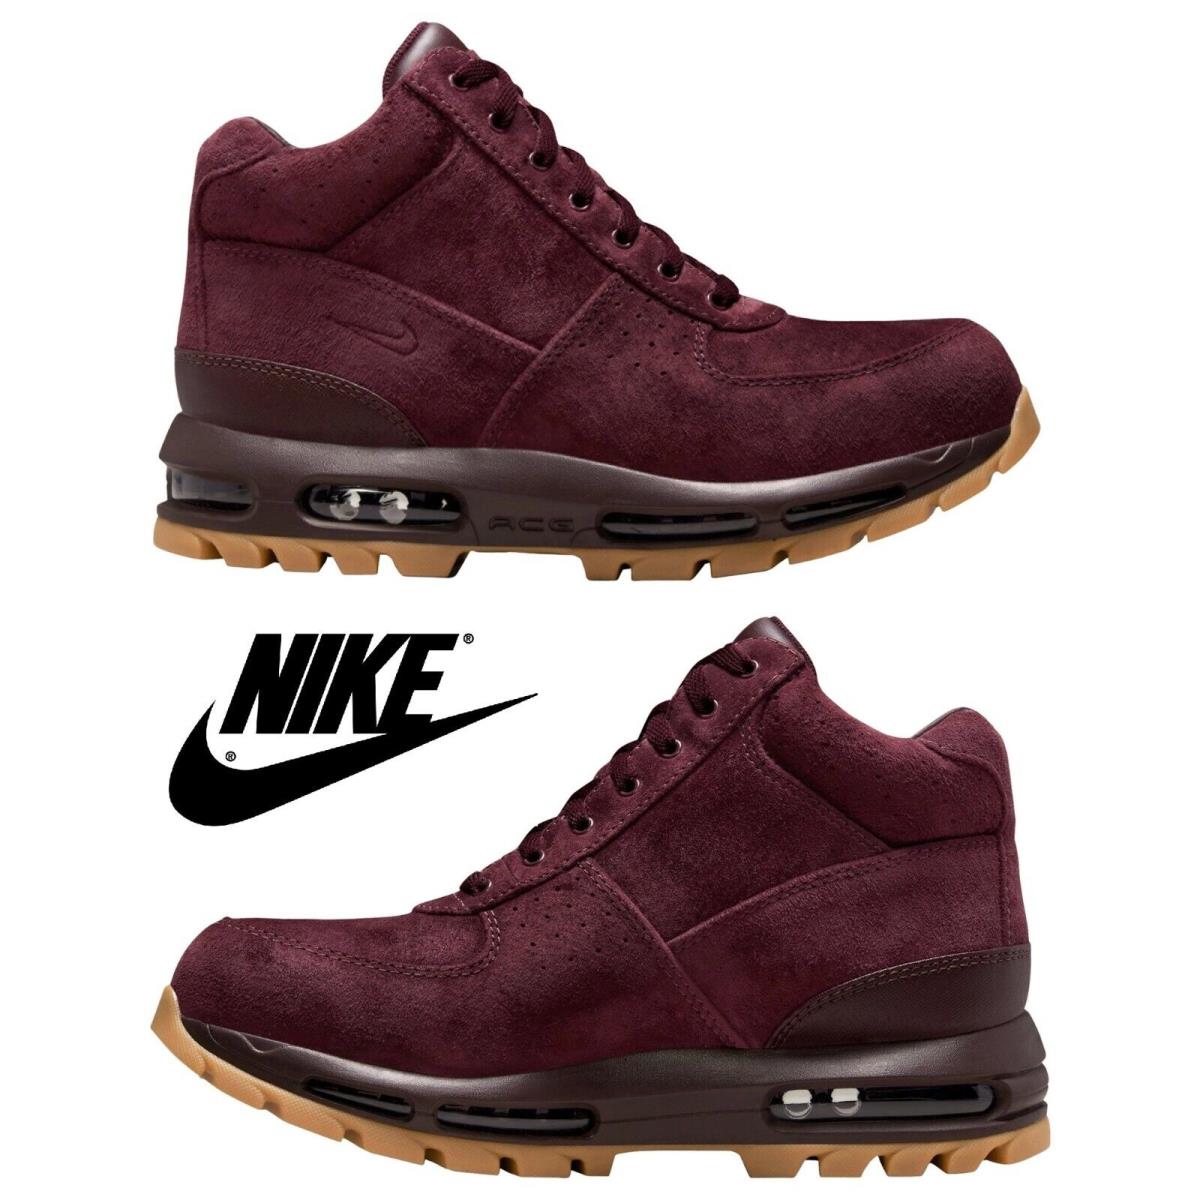 Nike Air Max Goadome Men`s Boots Winter Hiking Trail Waterproof Athletic Shoes - Brown, Manufacturer: Maroon/Brown